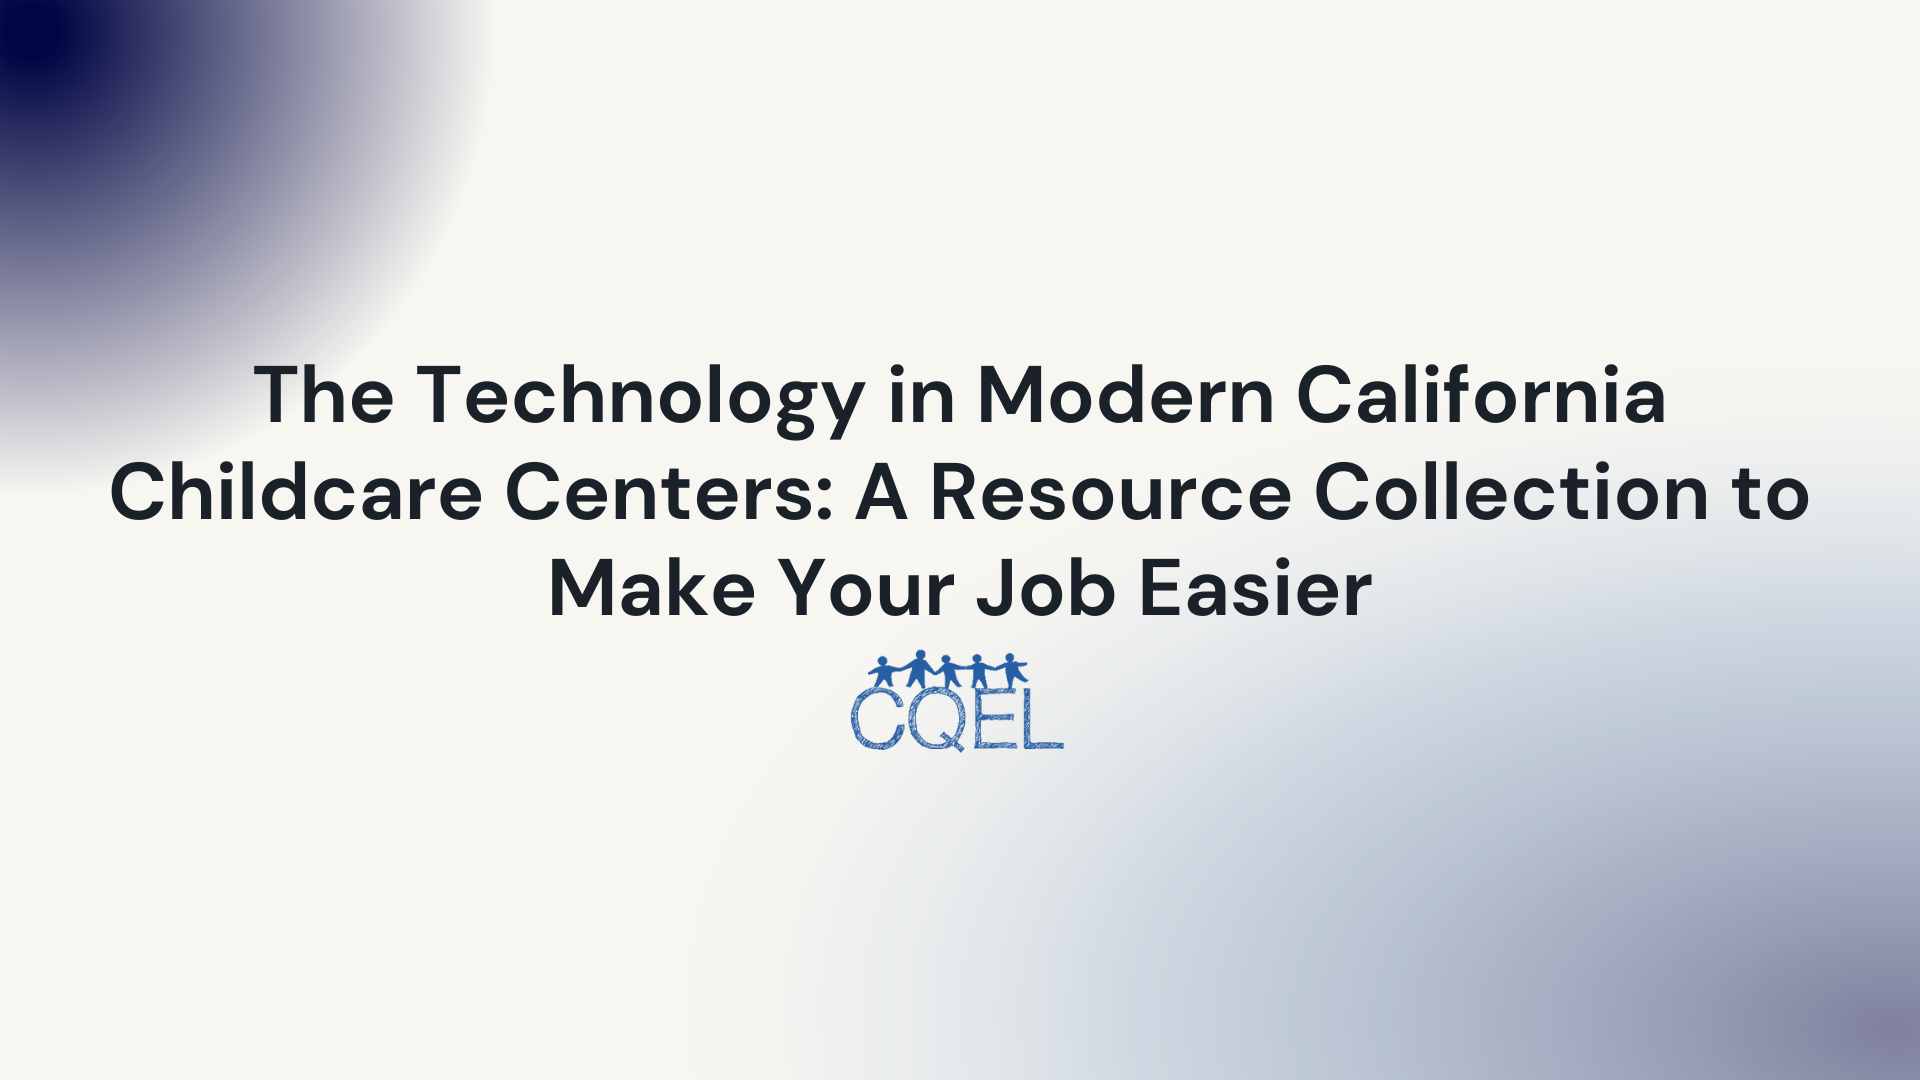 The Technology in Modern California Childcare Centers: A Resource Collection to Make Your Job Easier